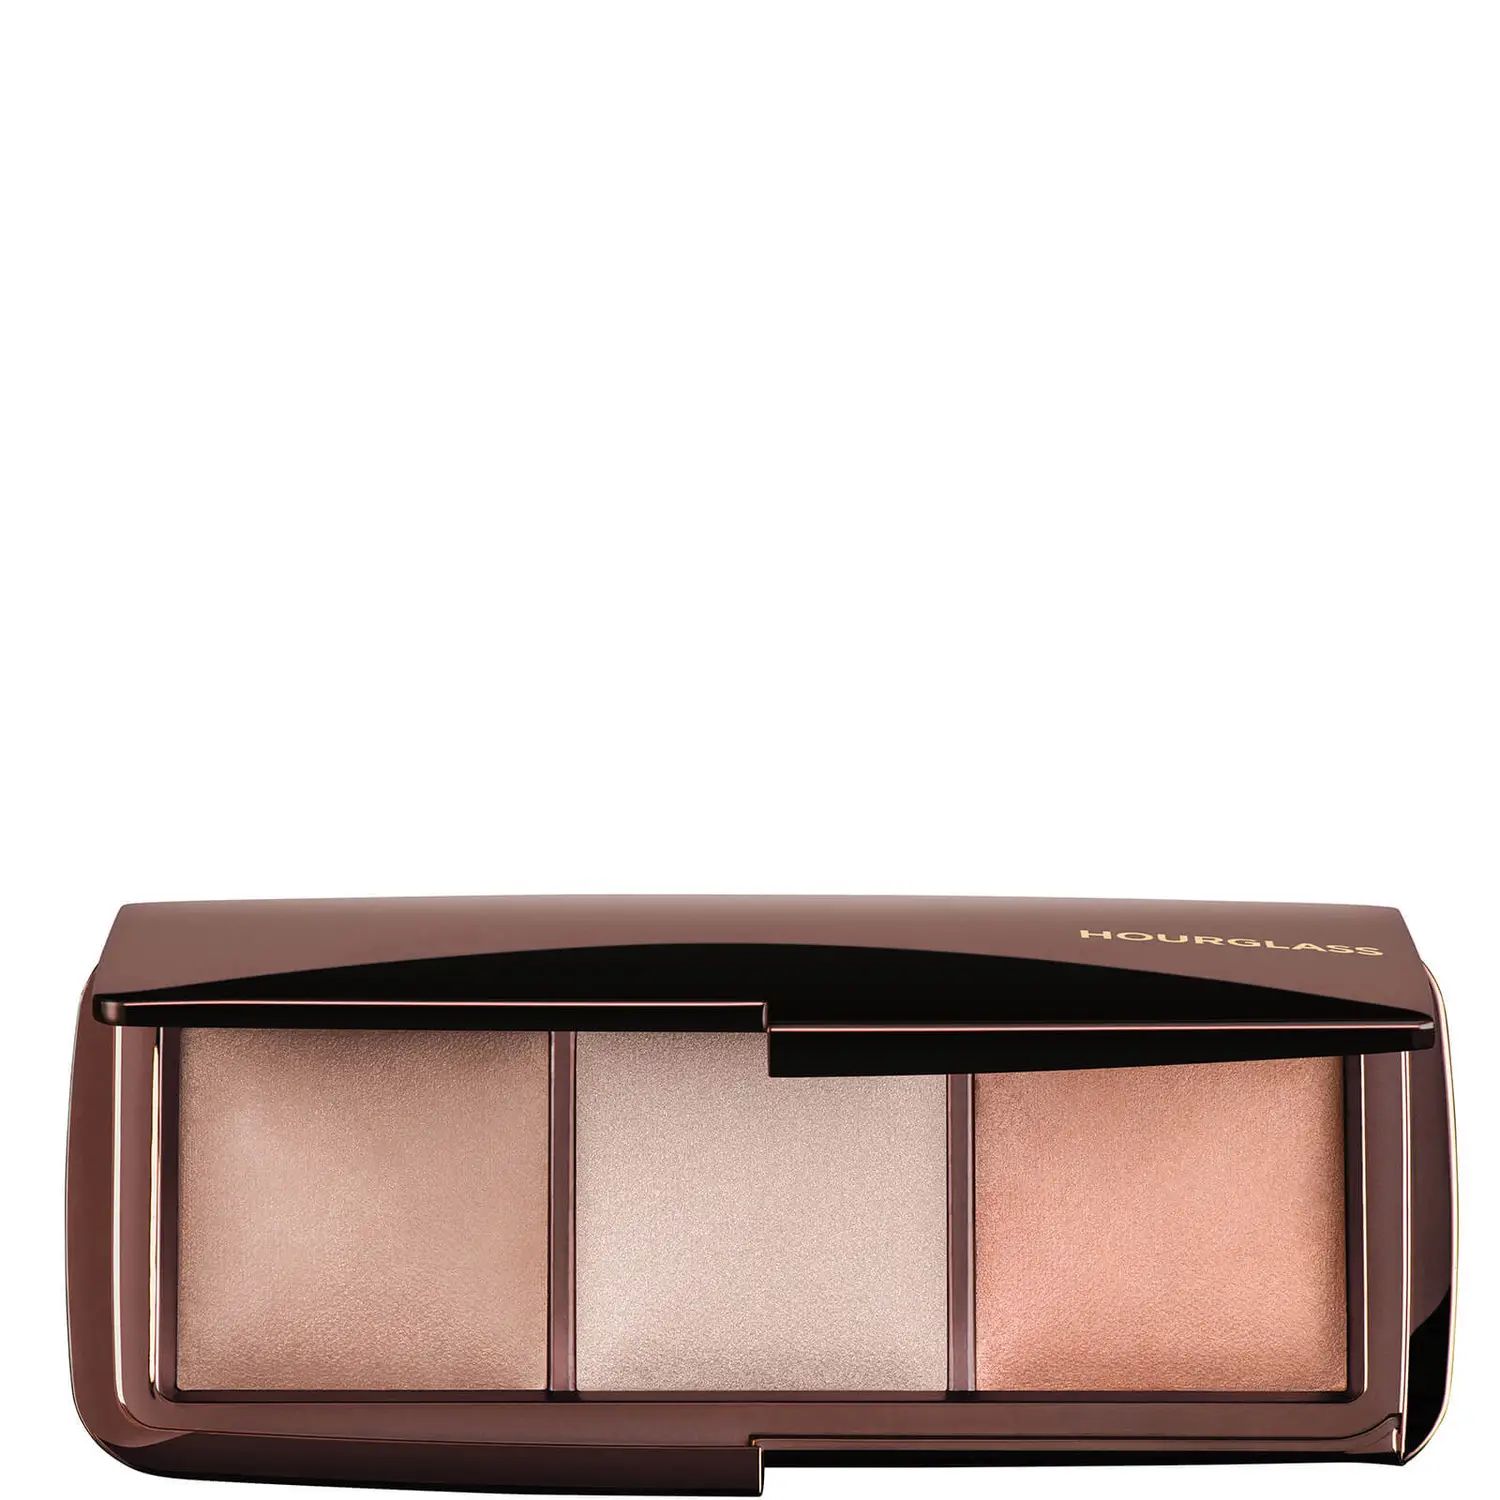 Hourglass Ambient Lighting Palette | Cult Beauty